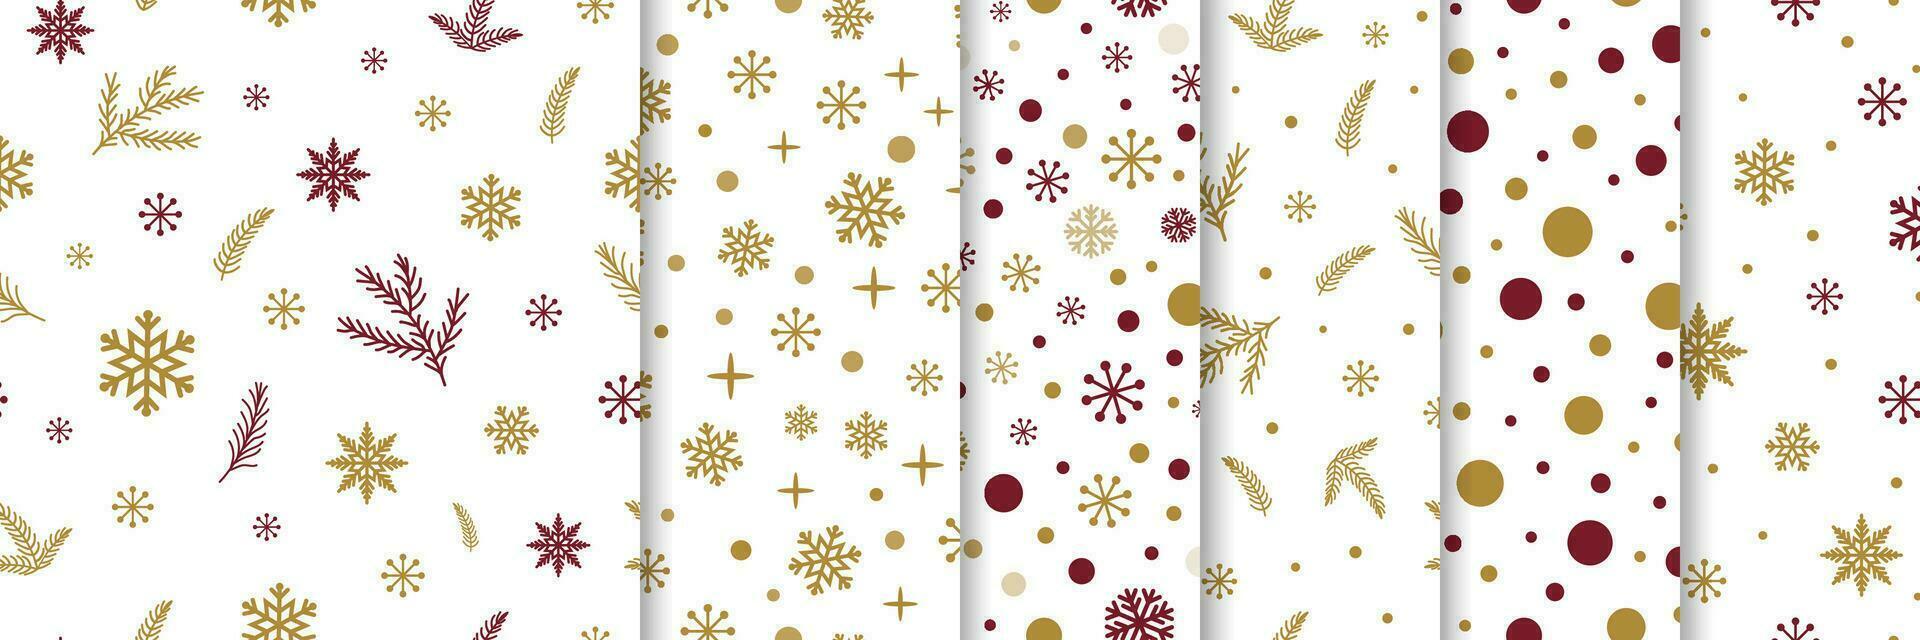 Classic red gold snowflakes branches seamless pattern set Christmas seamless pattern collection. Winter time texture New year holiday background wallpaper textures, fabric prints. Vector illustration.